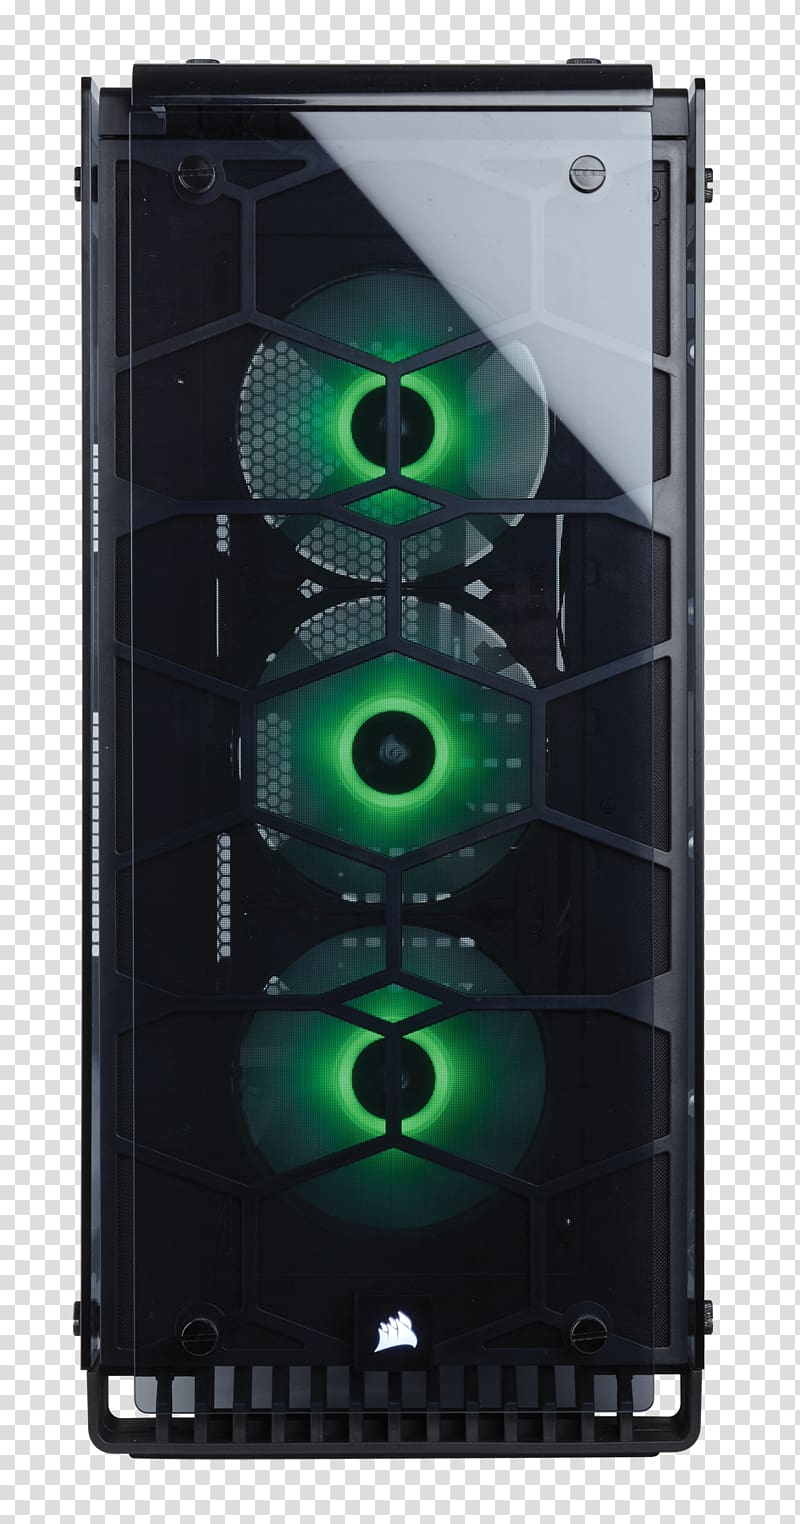 Computer Cases & Housings Power supply unit microATX Corsair Components, kl tower transparent background PNG clipart